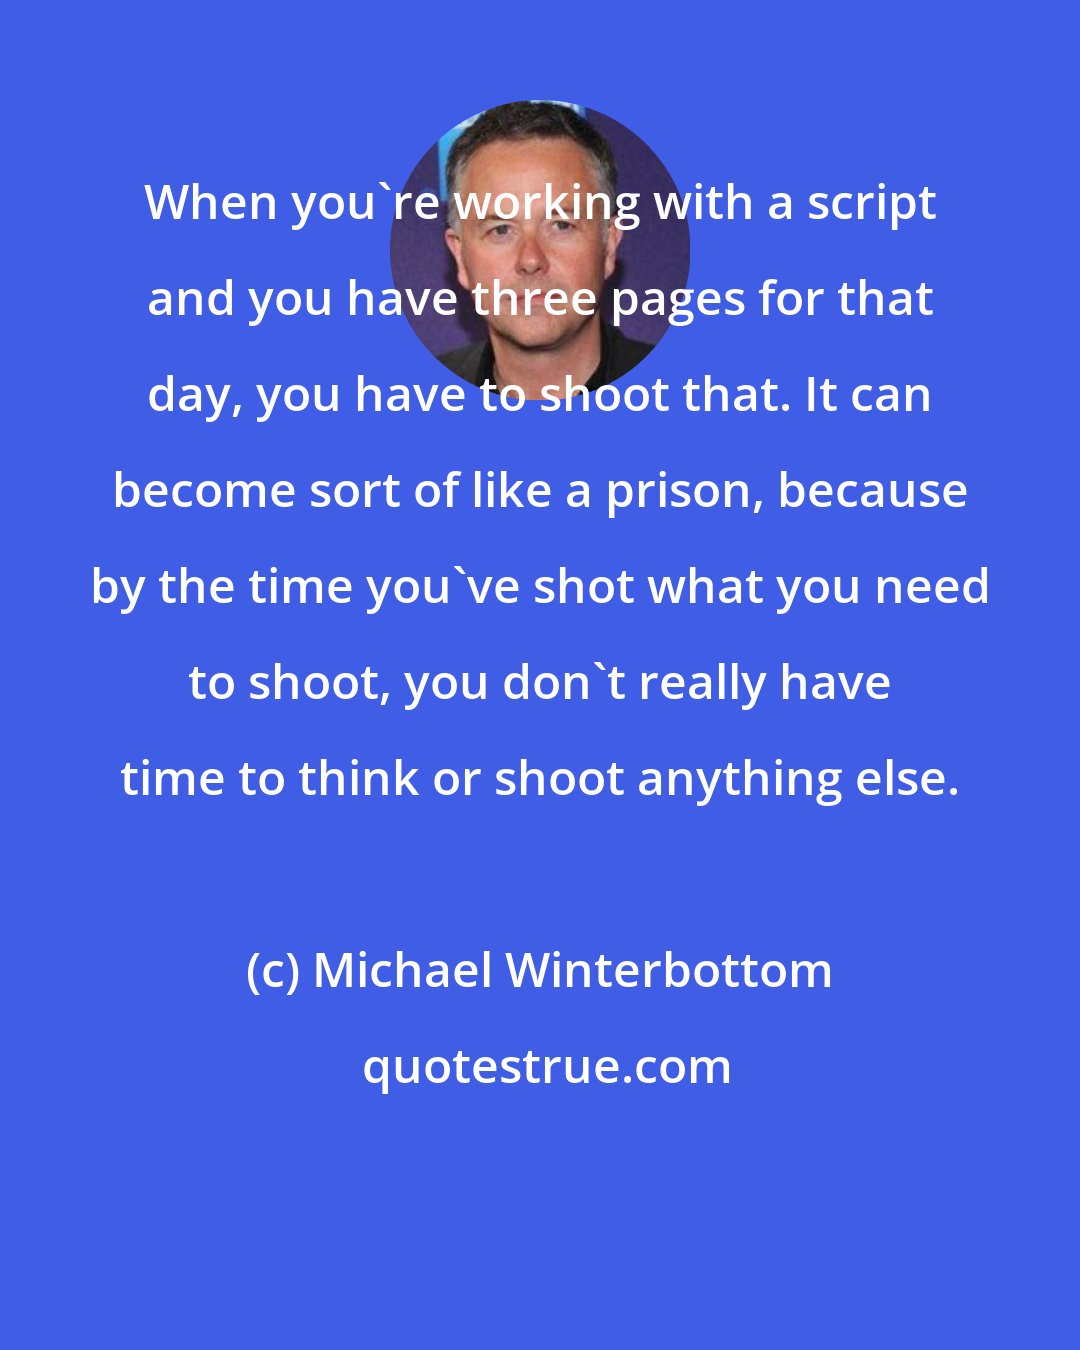 Michael Winterbottom: When you're working with a script and you have three pages for that day, you have to shoot that. It can become sort of like a prison, because by the time you've shot what you need to shoot, you don't really have time to think or shoot anything else.